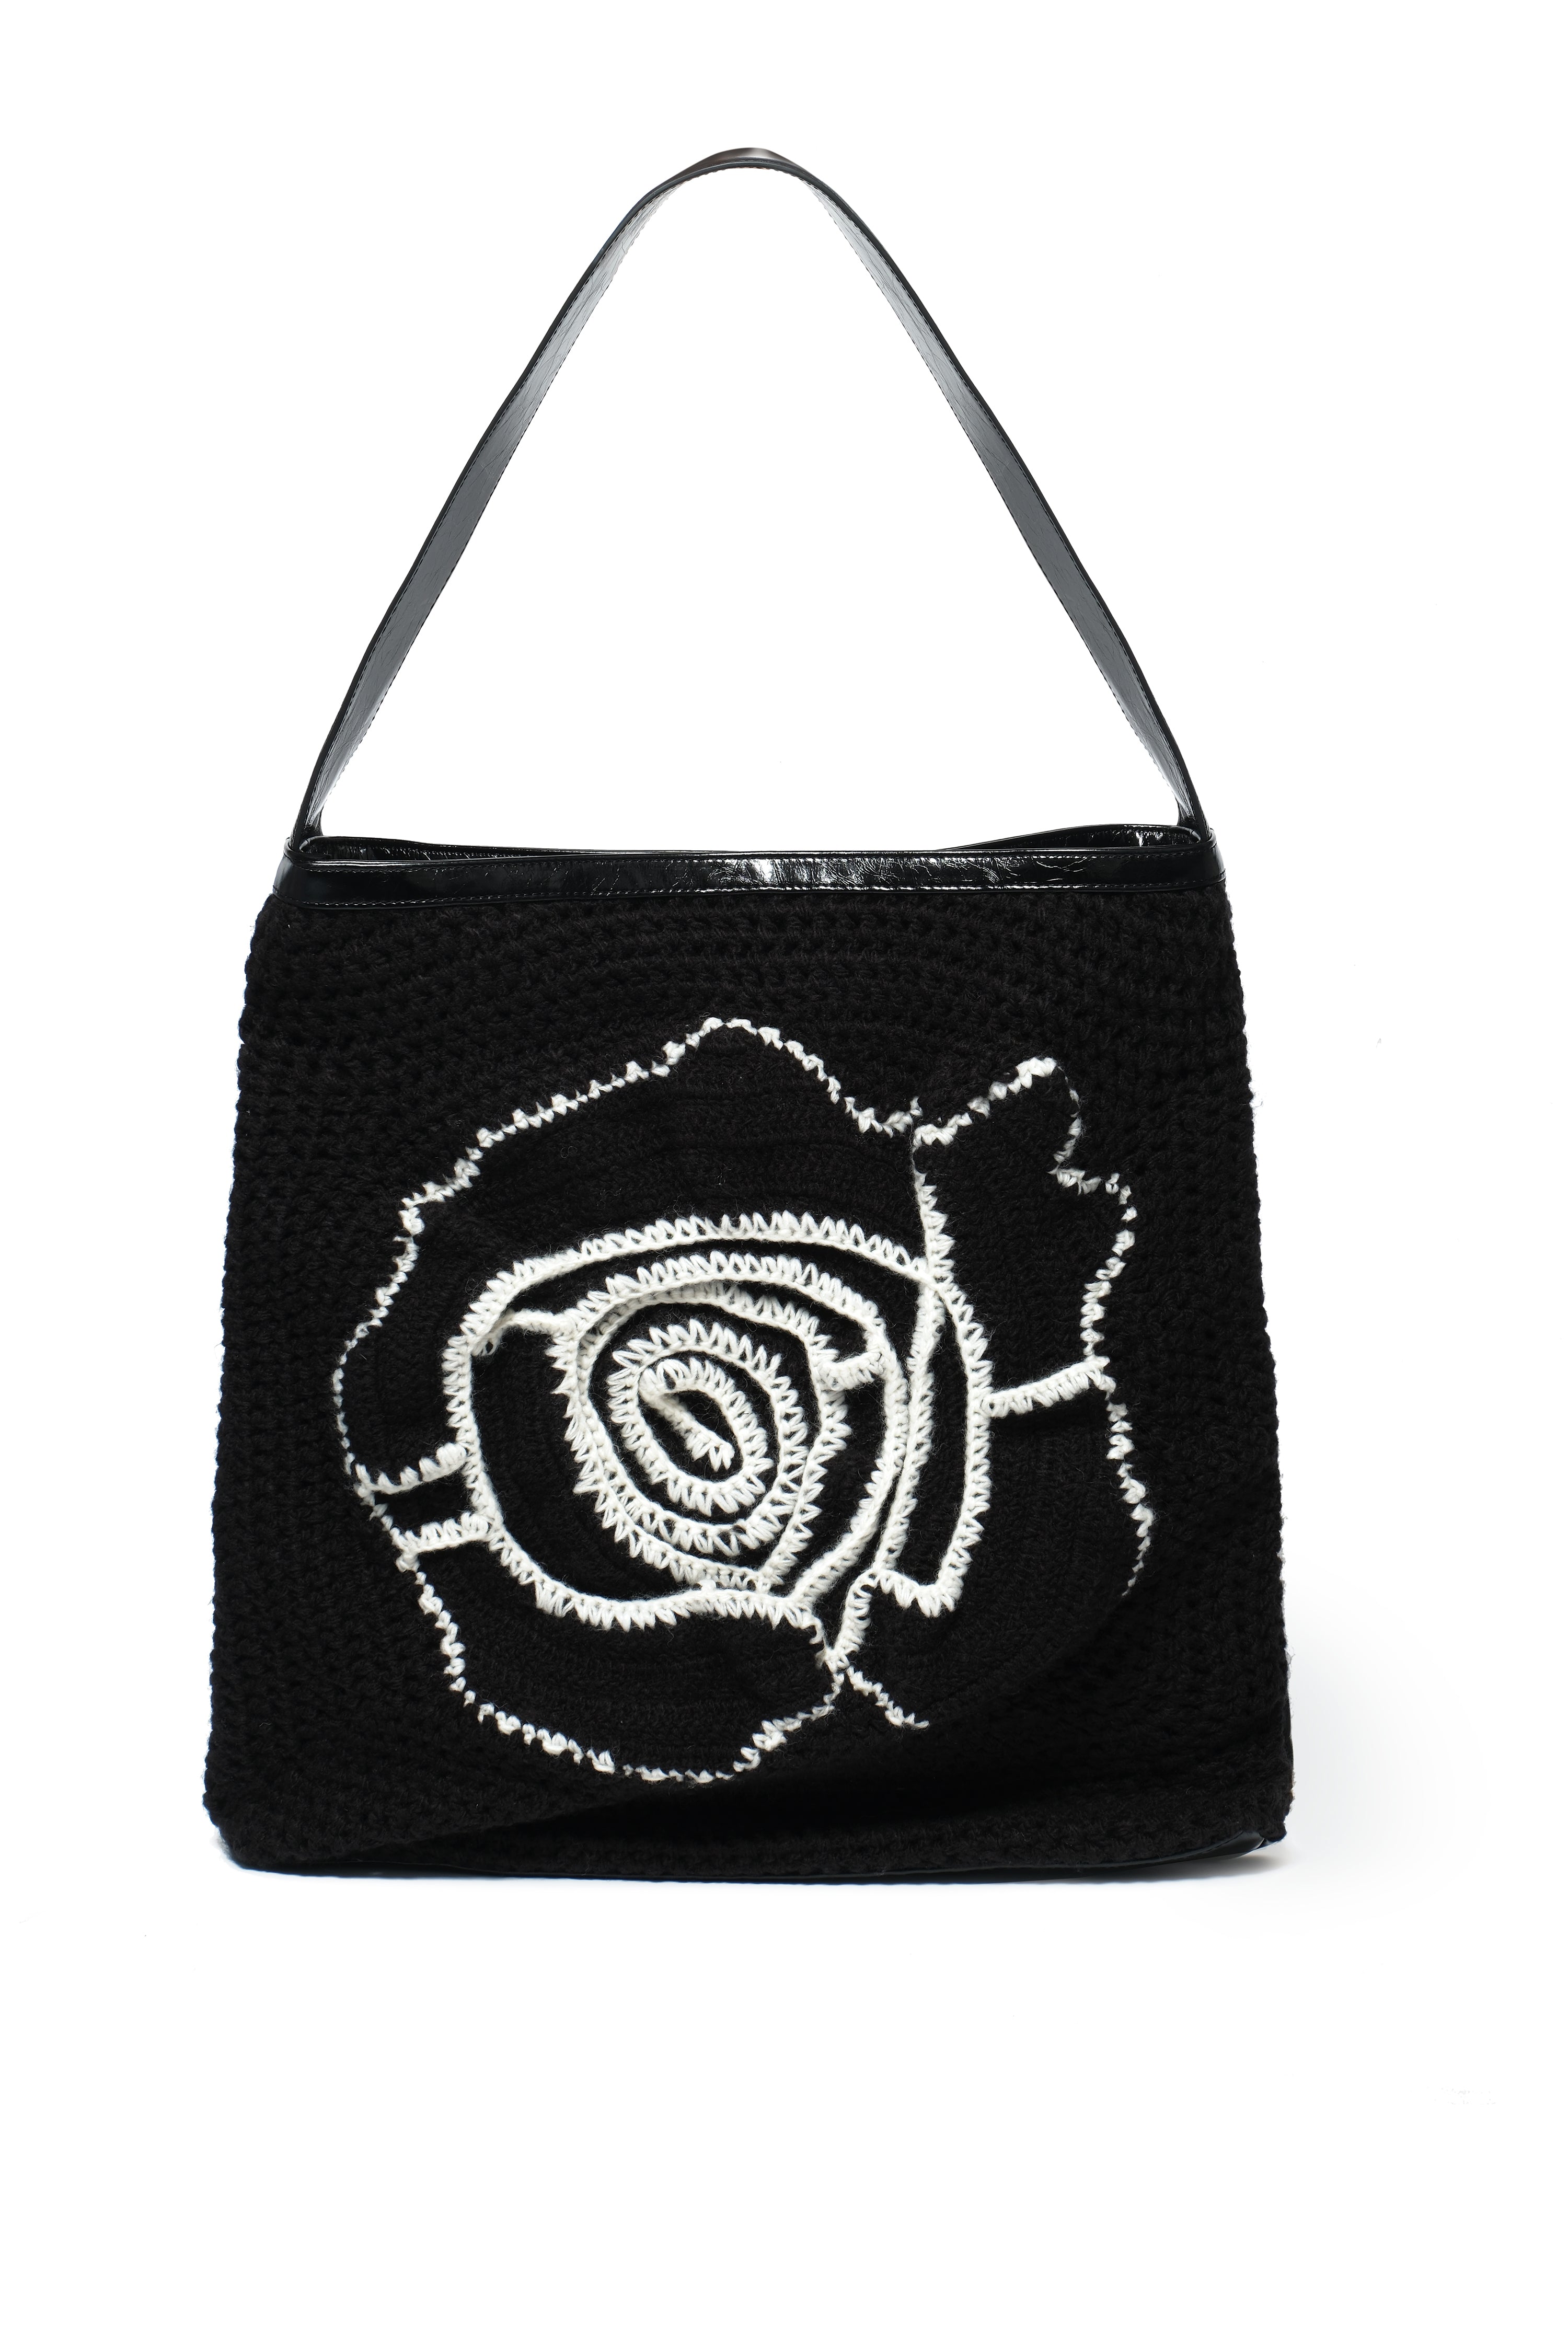 Black Floral Crochet Leather Tote